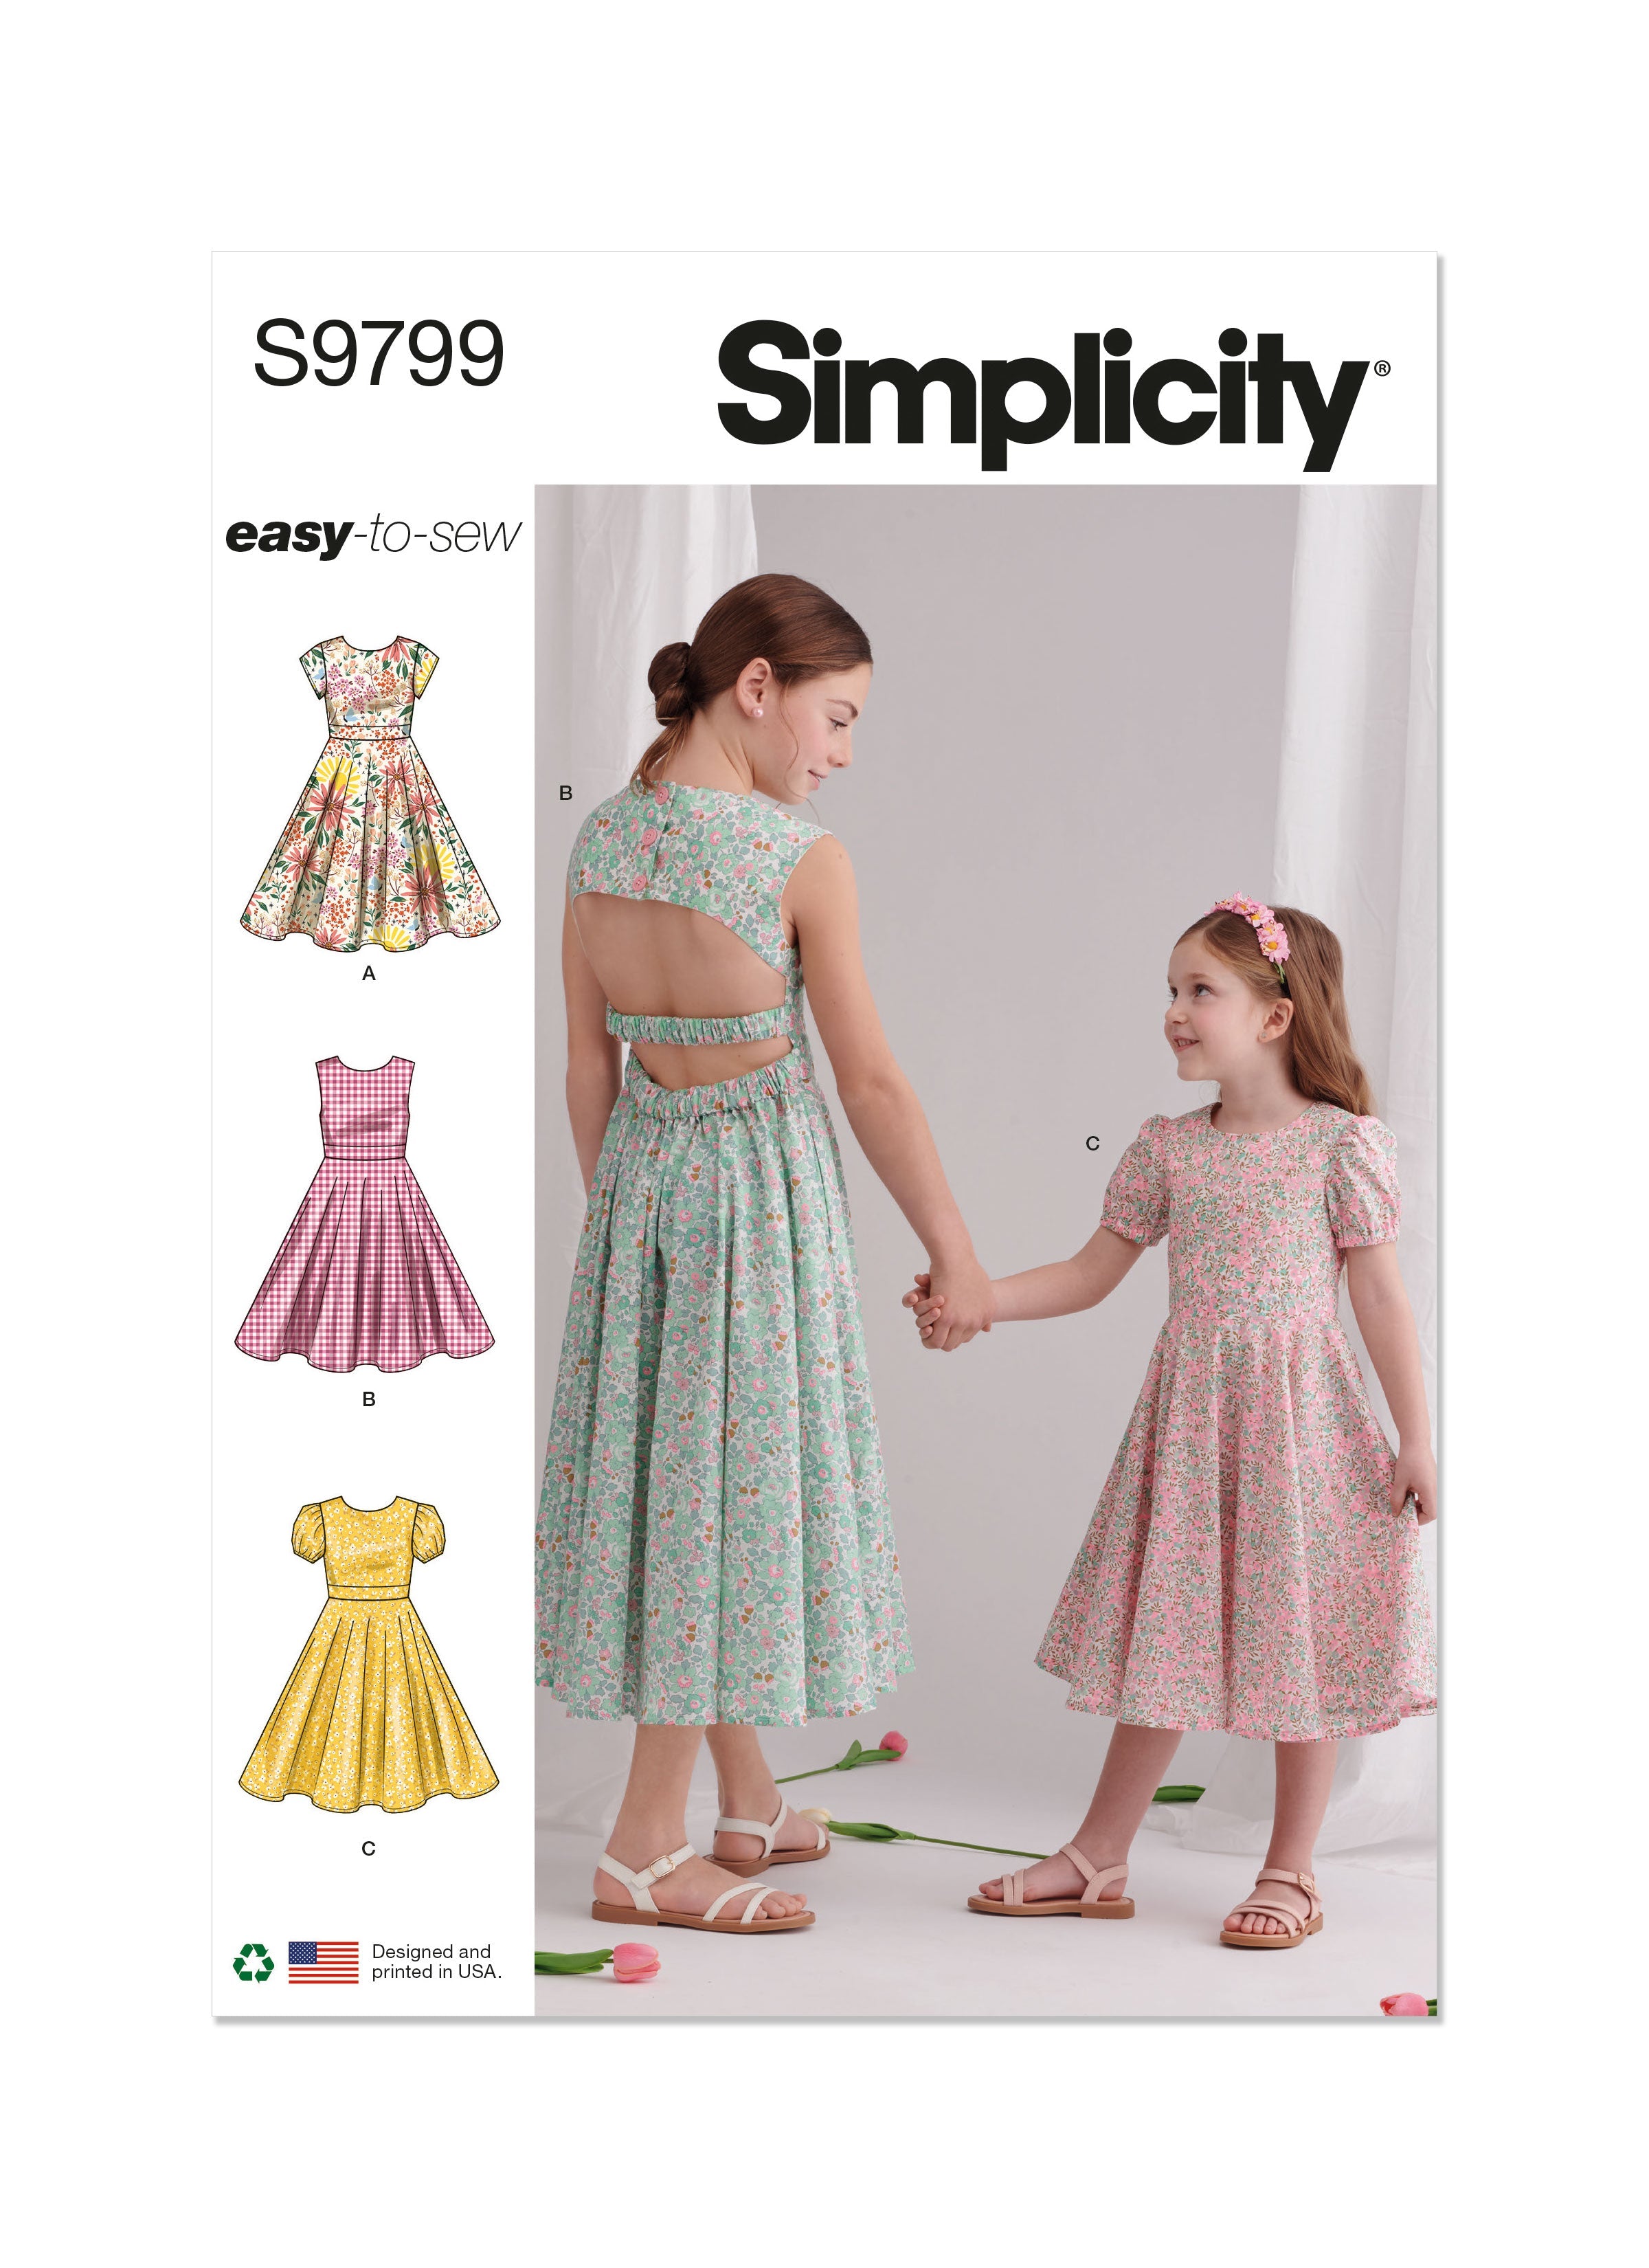 Simplicity sewing pattern 9799 Girls' Dresses from Jaycotts Sewing Supplies